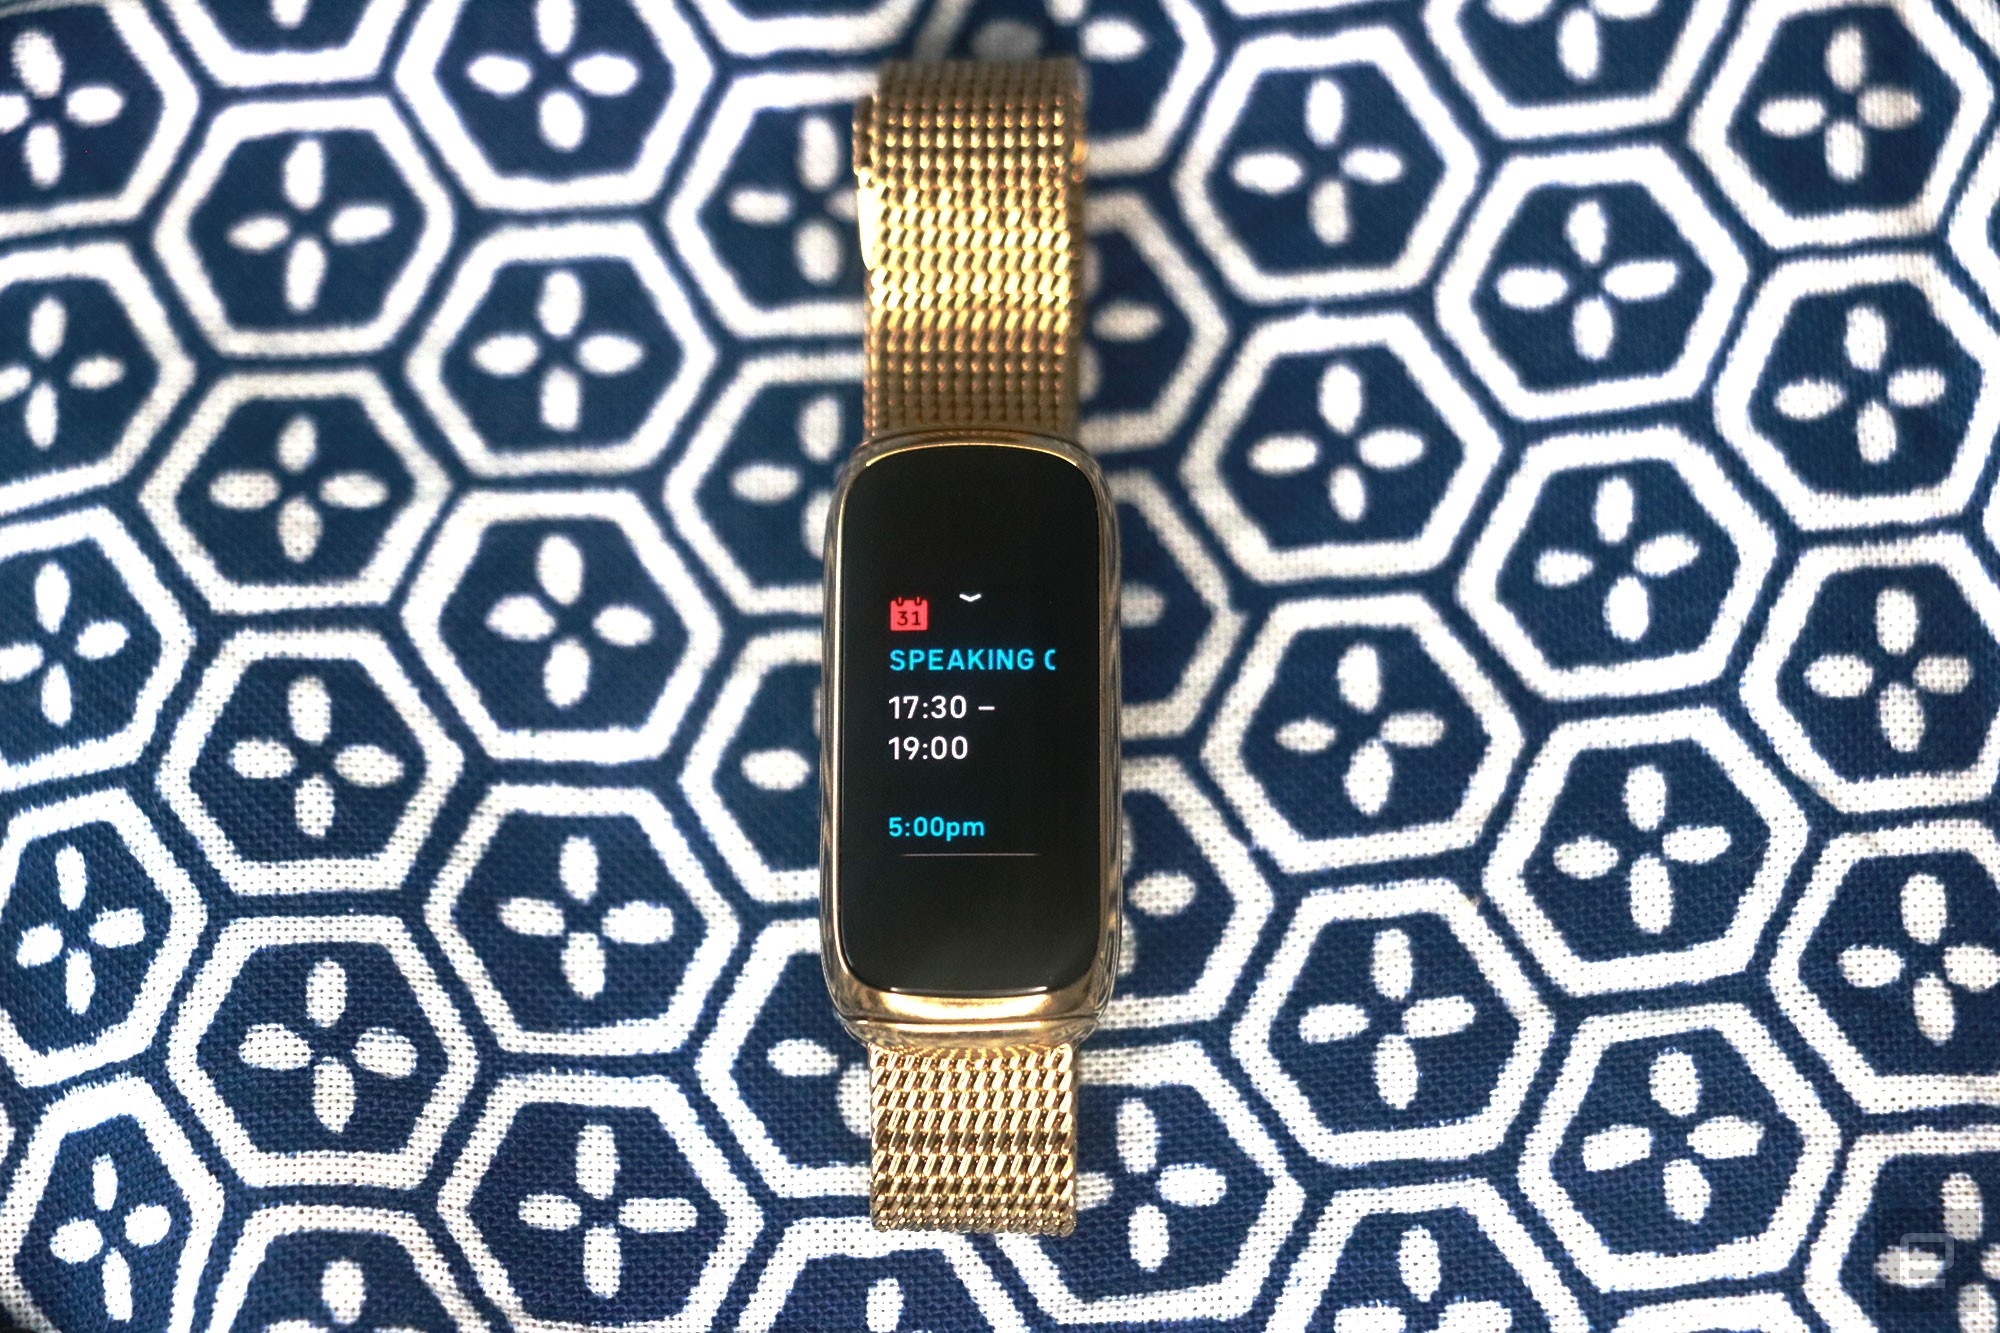 Front view of the Fitbit Luxe with a gold mesh bracelet on a patterned blue and white background. Its screen shows a calendar notification for an event from 5:30pm to 7pm. | DeviceDaily.com